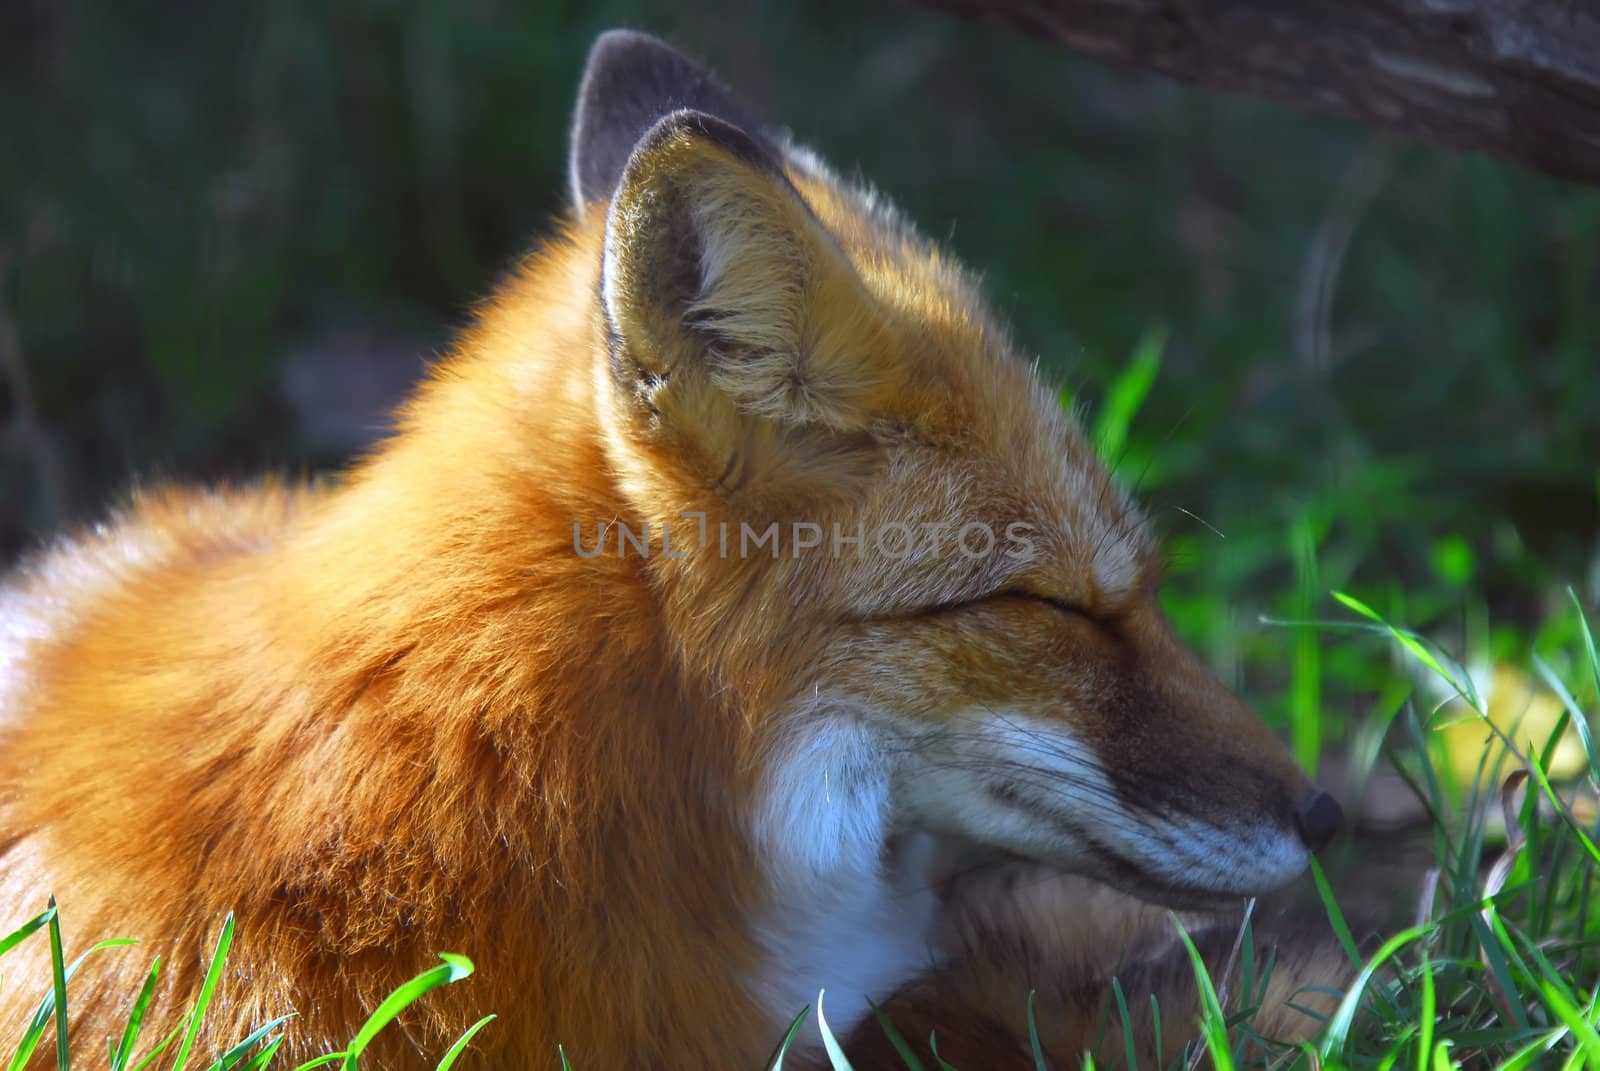 A close-up portrait of a Red Fox at rest